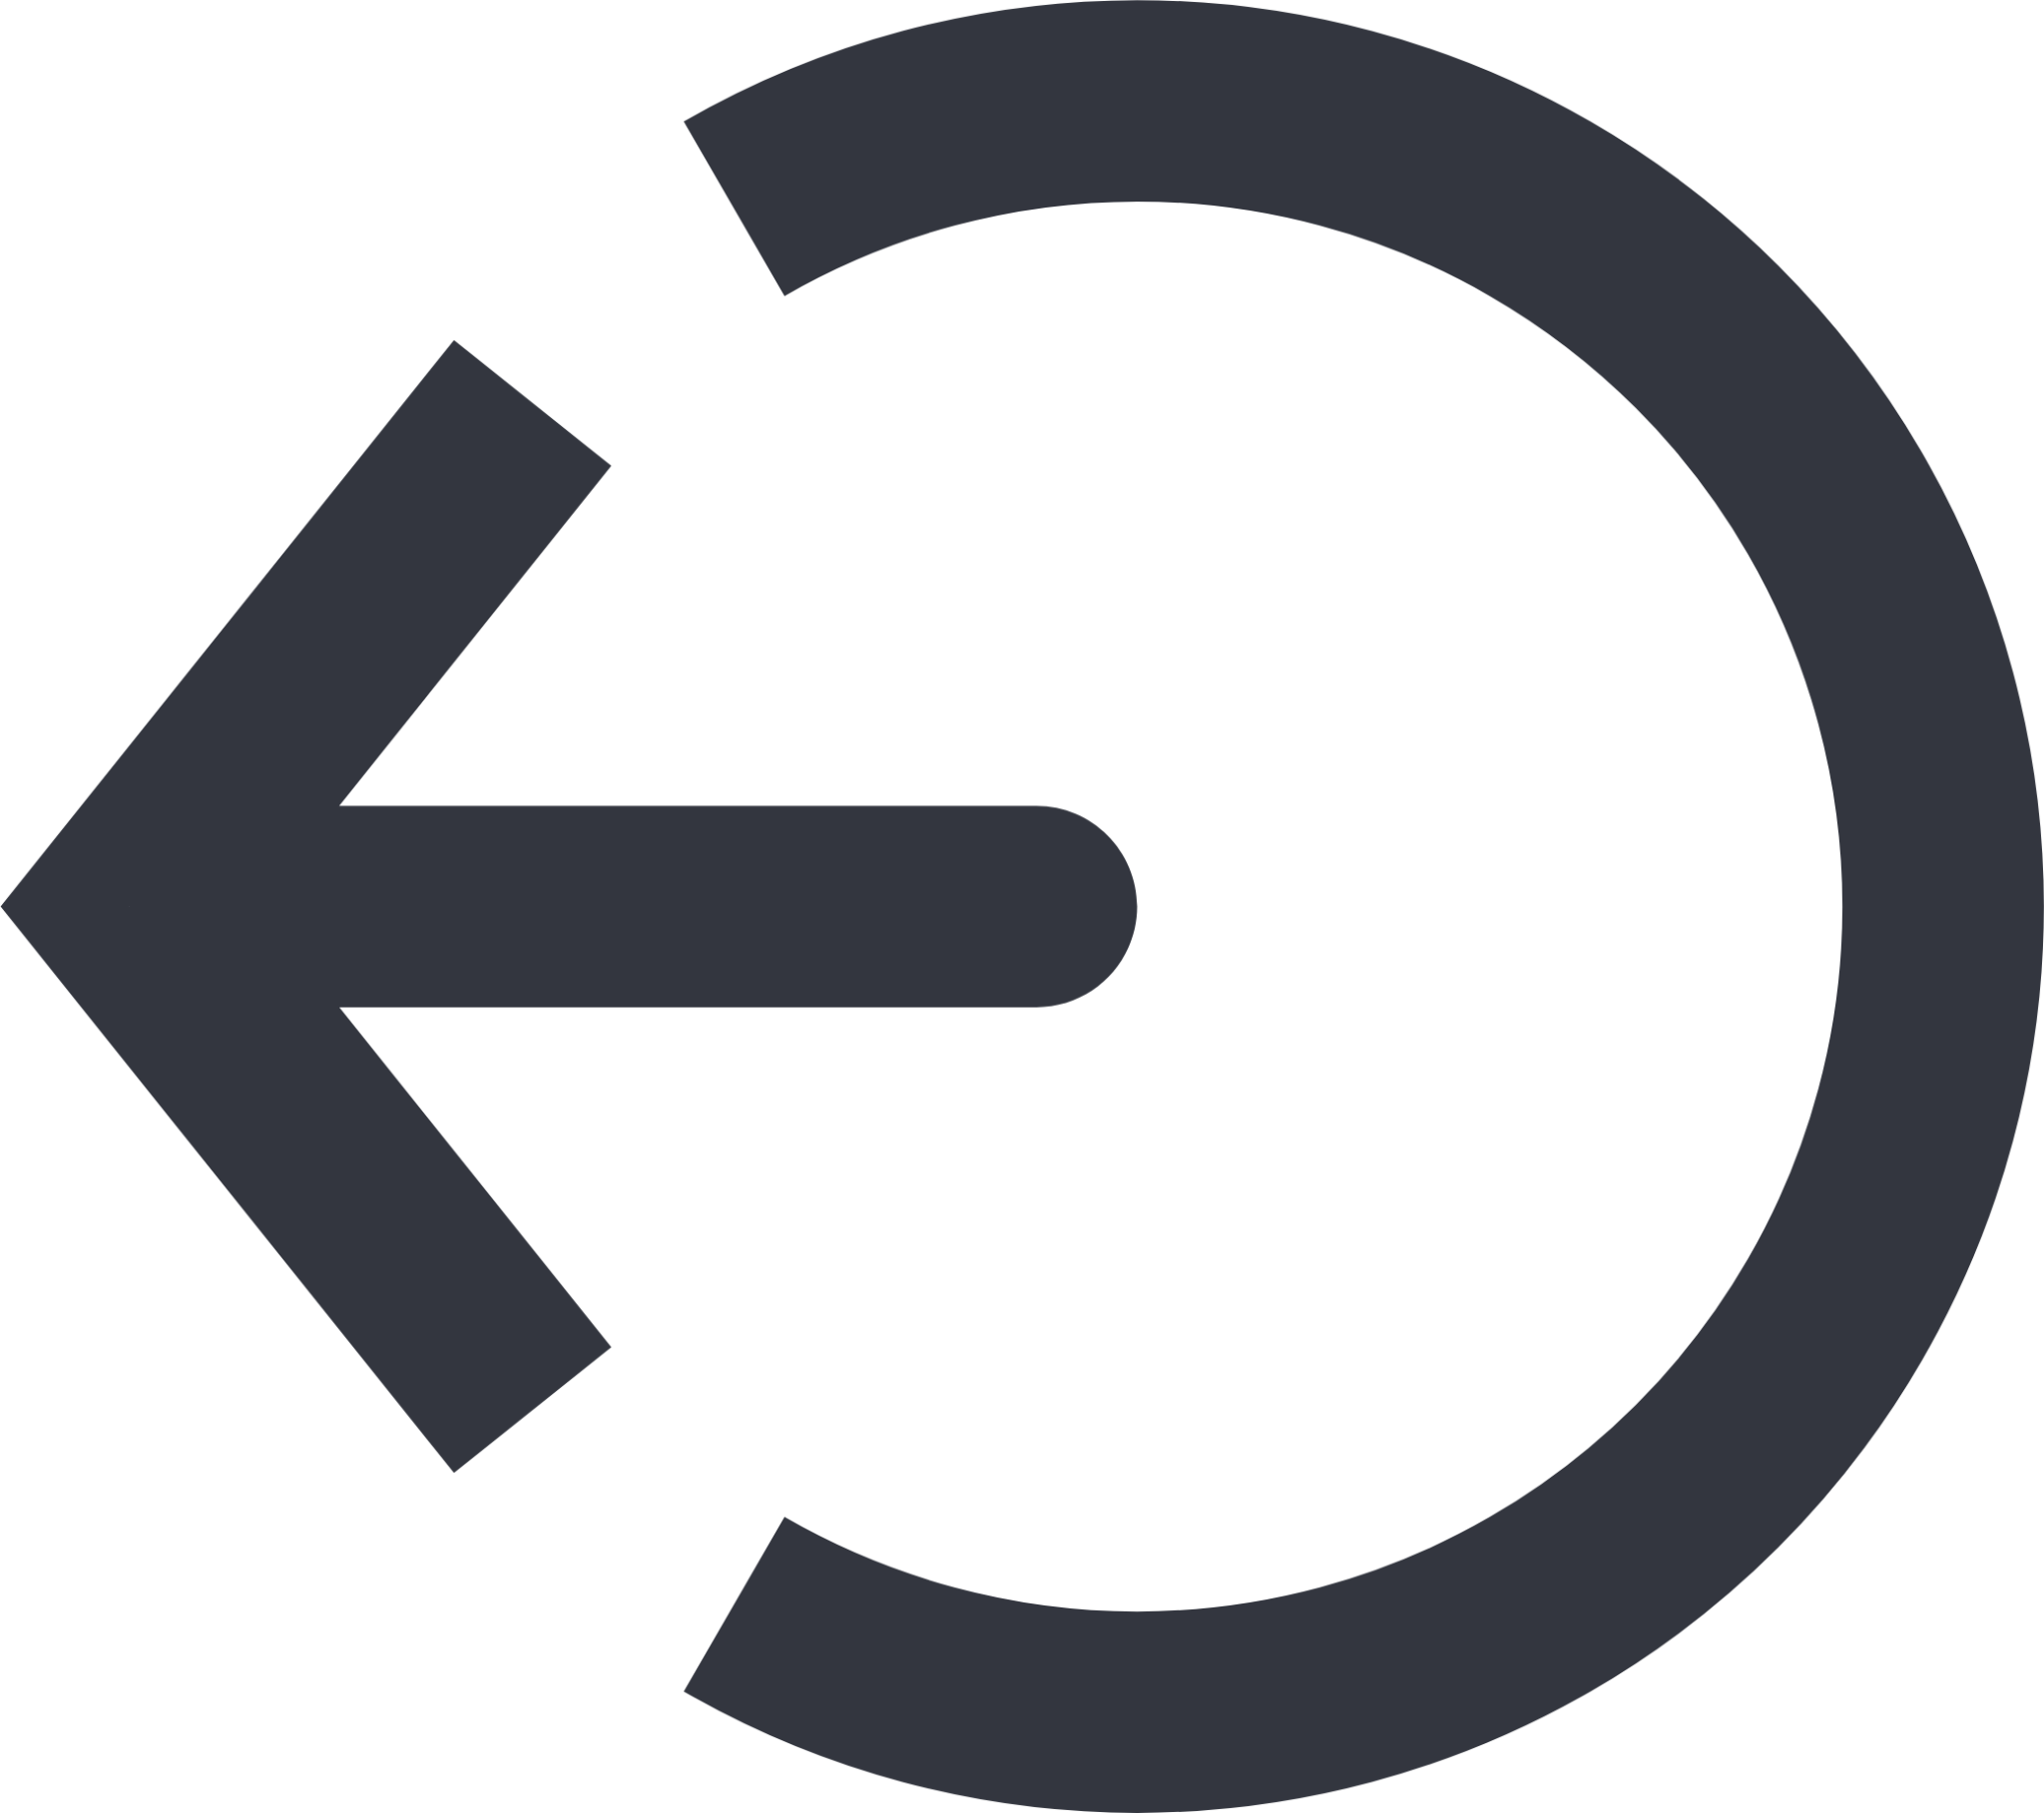 Sign out circle icon